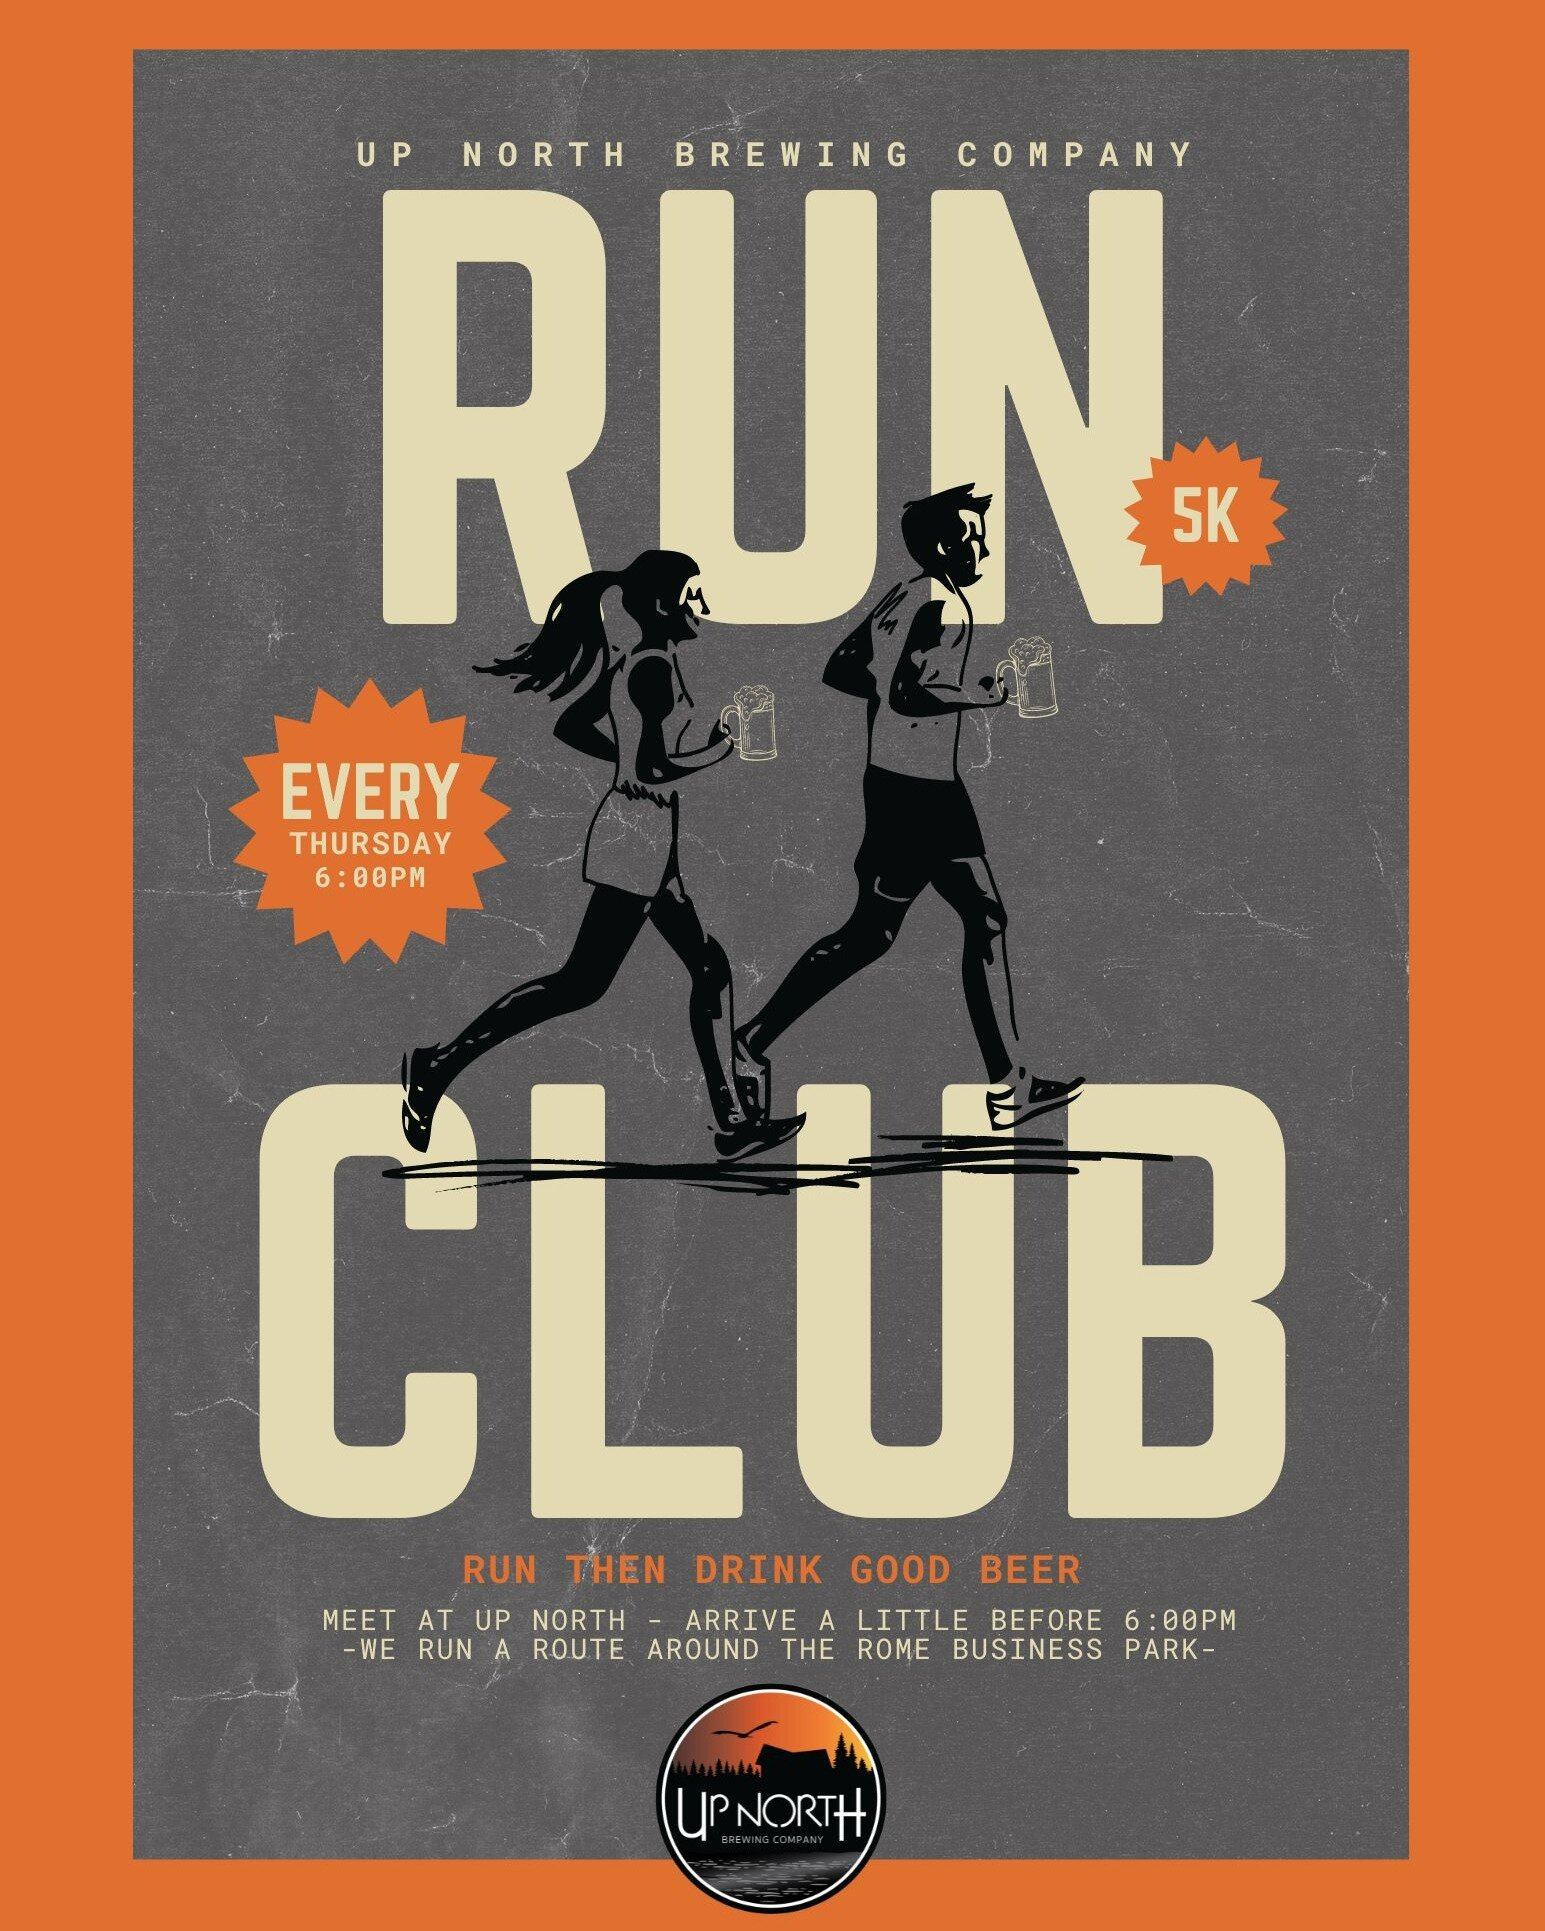 Calling all runners and beer-lovers! 👟🍺

Up North Brewing Company&rsquo;s Run Club will start on April 4, 2024 at 6:00 pm! We meet weekly at Up North Brewing Co to run a 5K around Rome's Business Park. Following the run, we enjoy a post-run social 